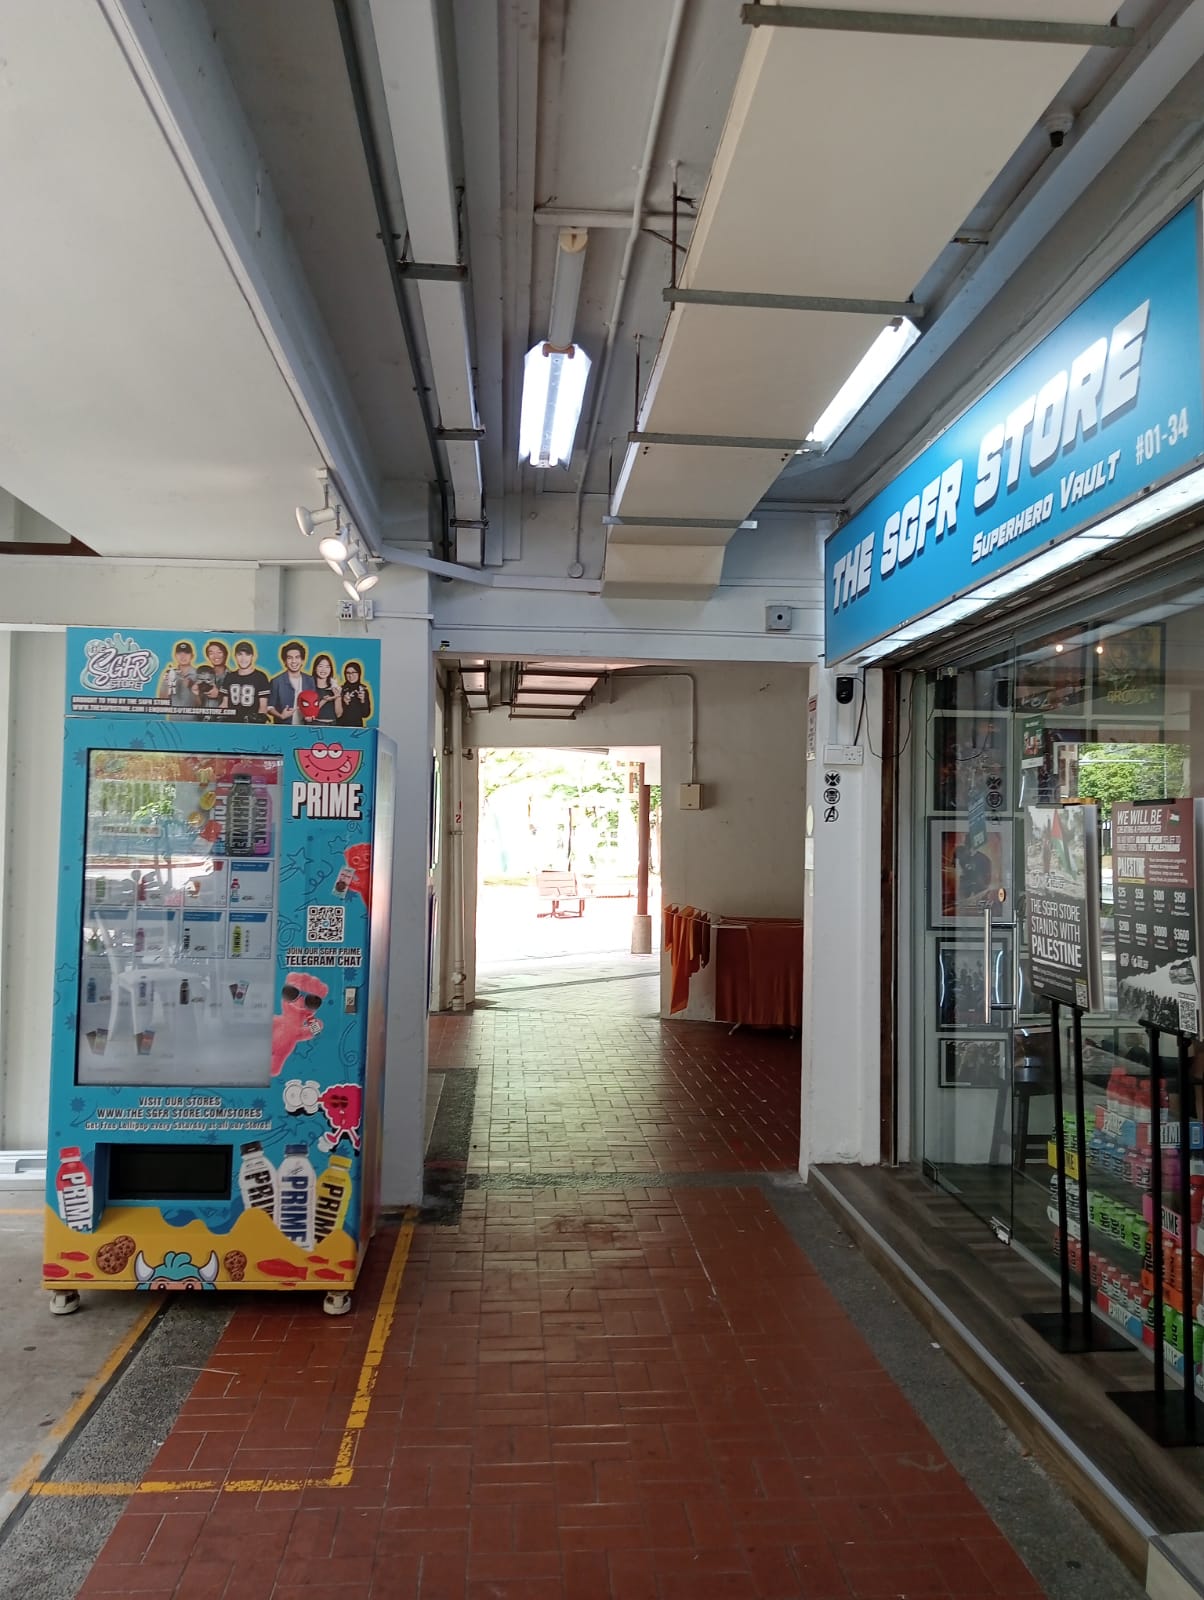 SGFR Store Locations; Singapore Coolest Candy Store – The SGFR Store